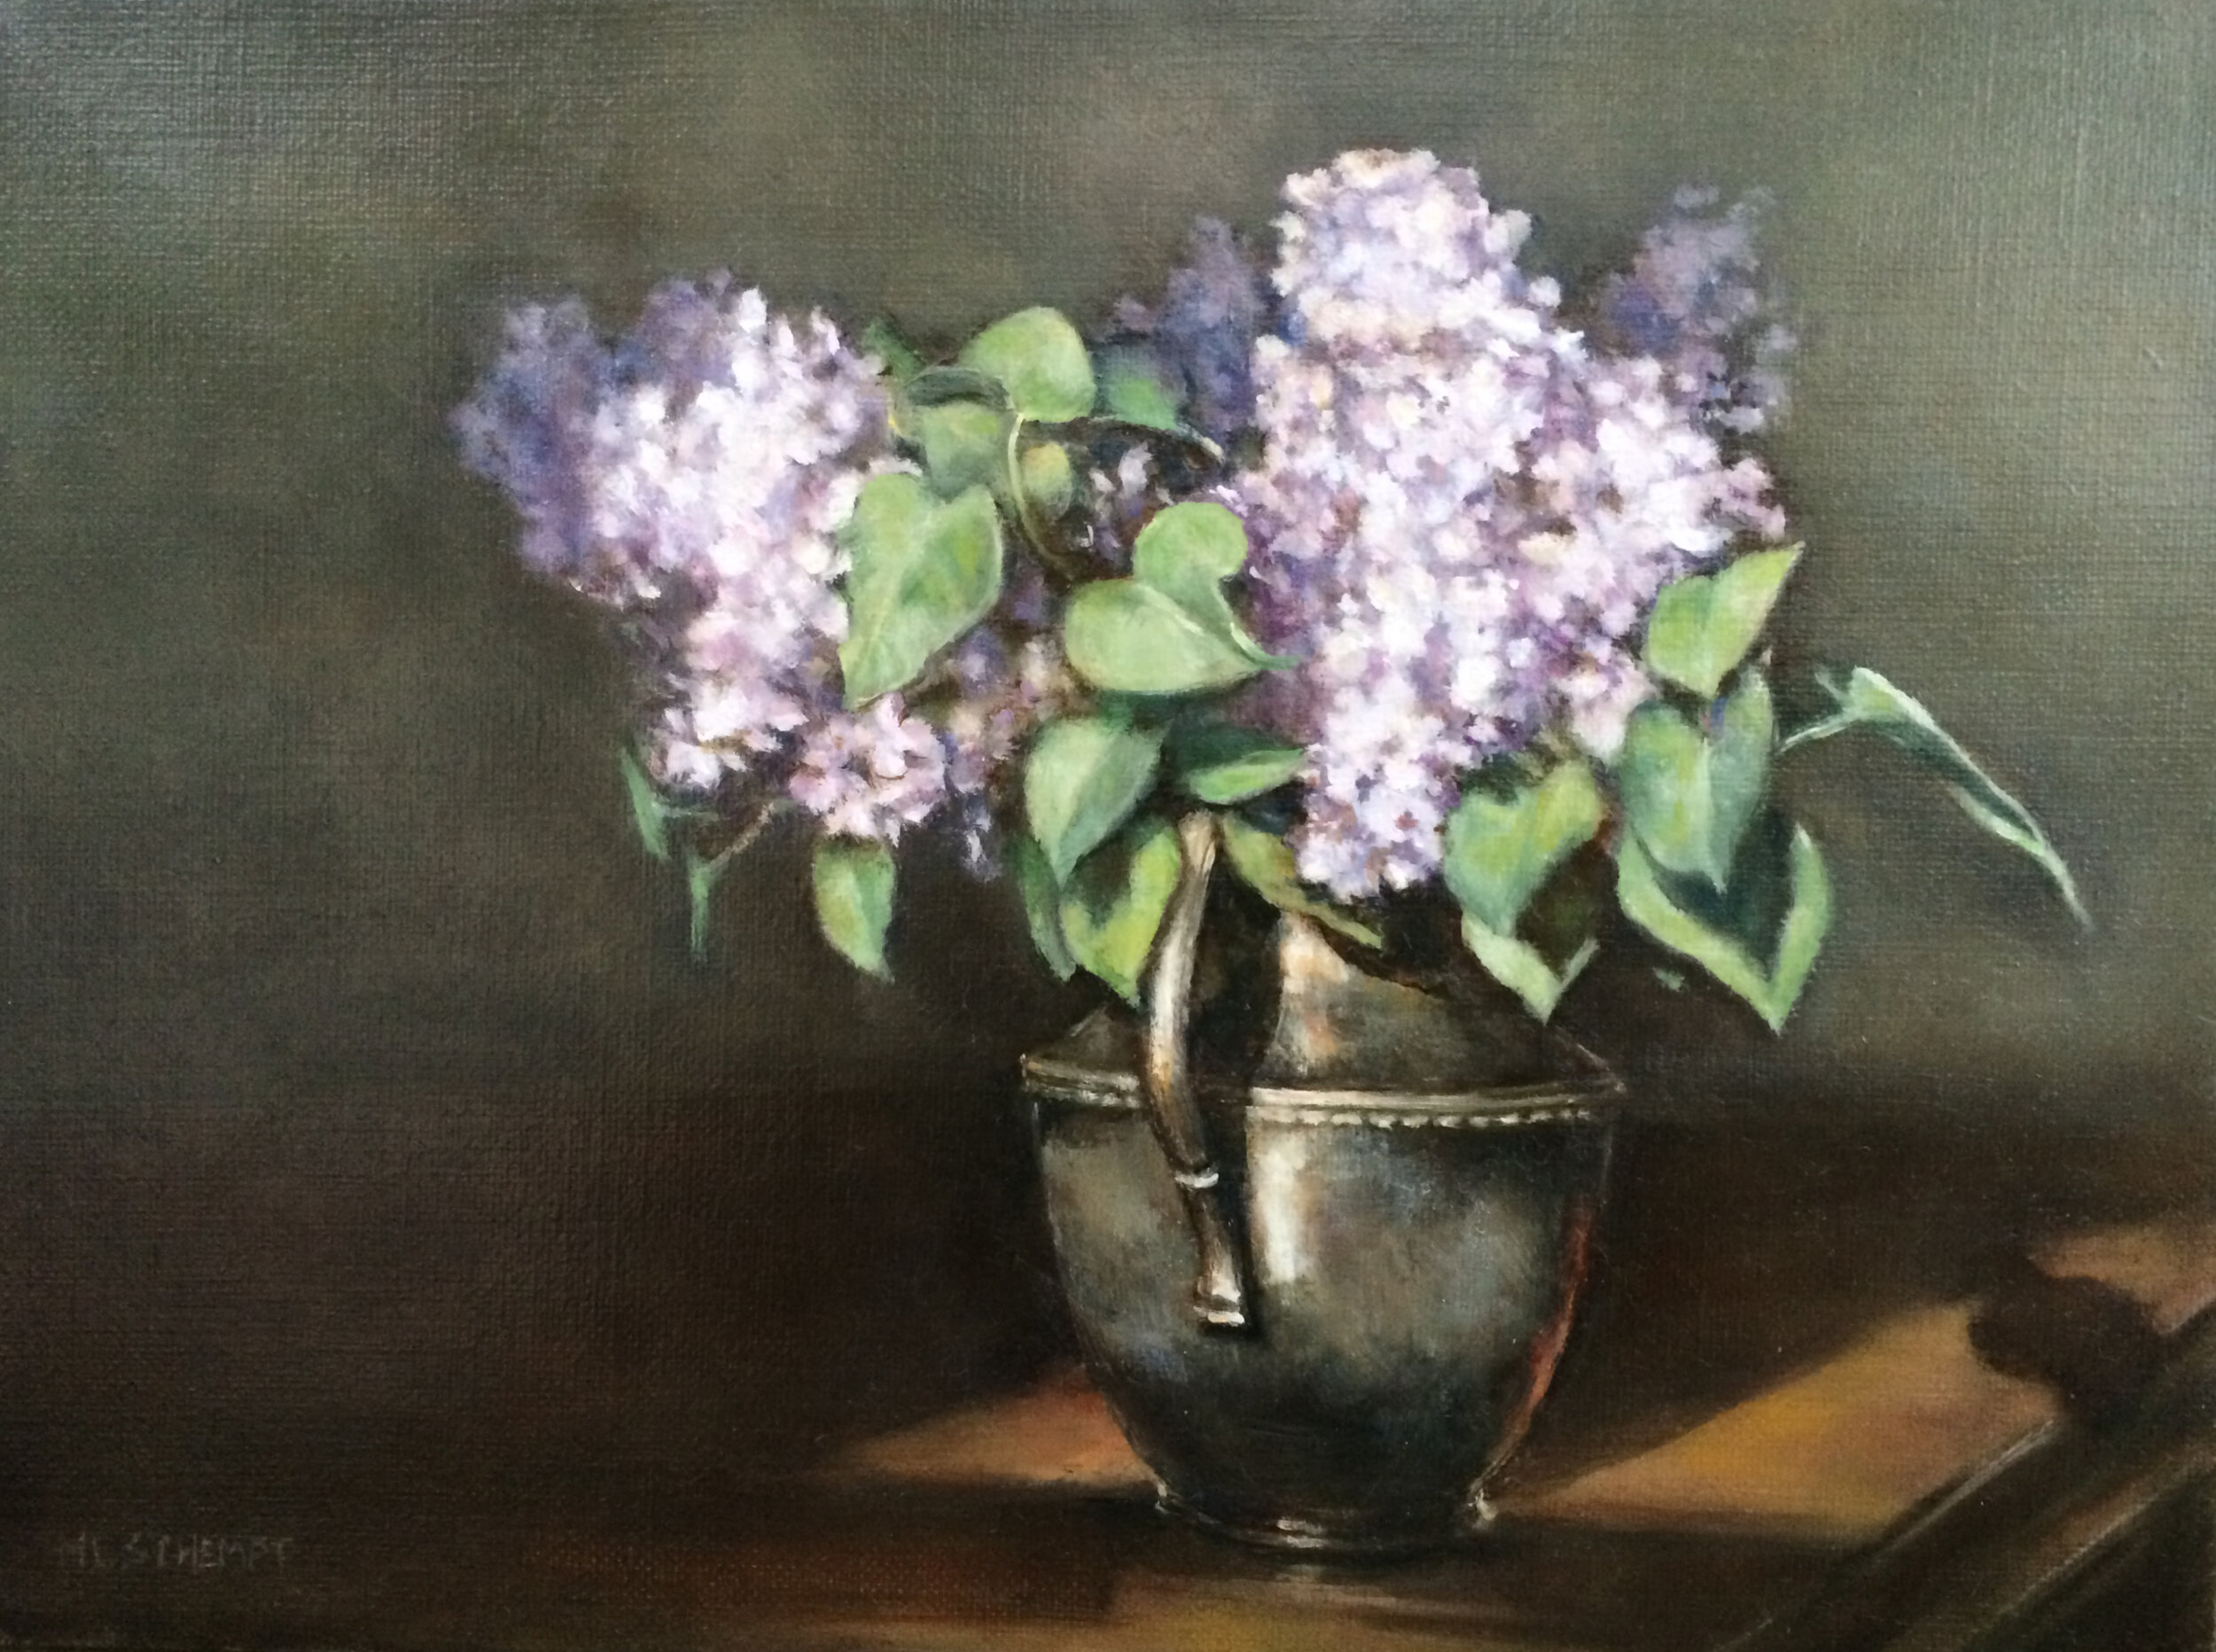  Mary Lou Schempf  Lilacs,  9” x 12”, oil on linen  (private collection)  